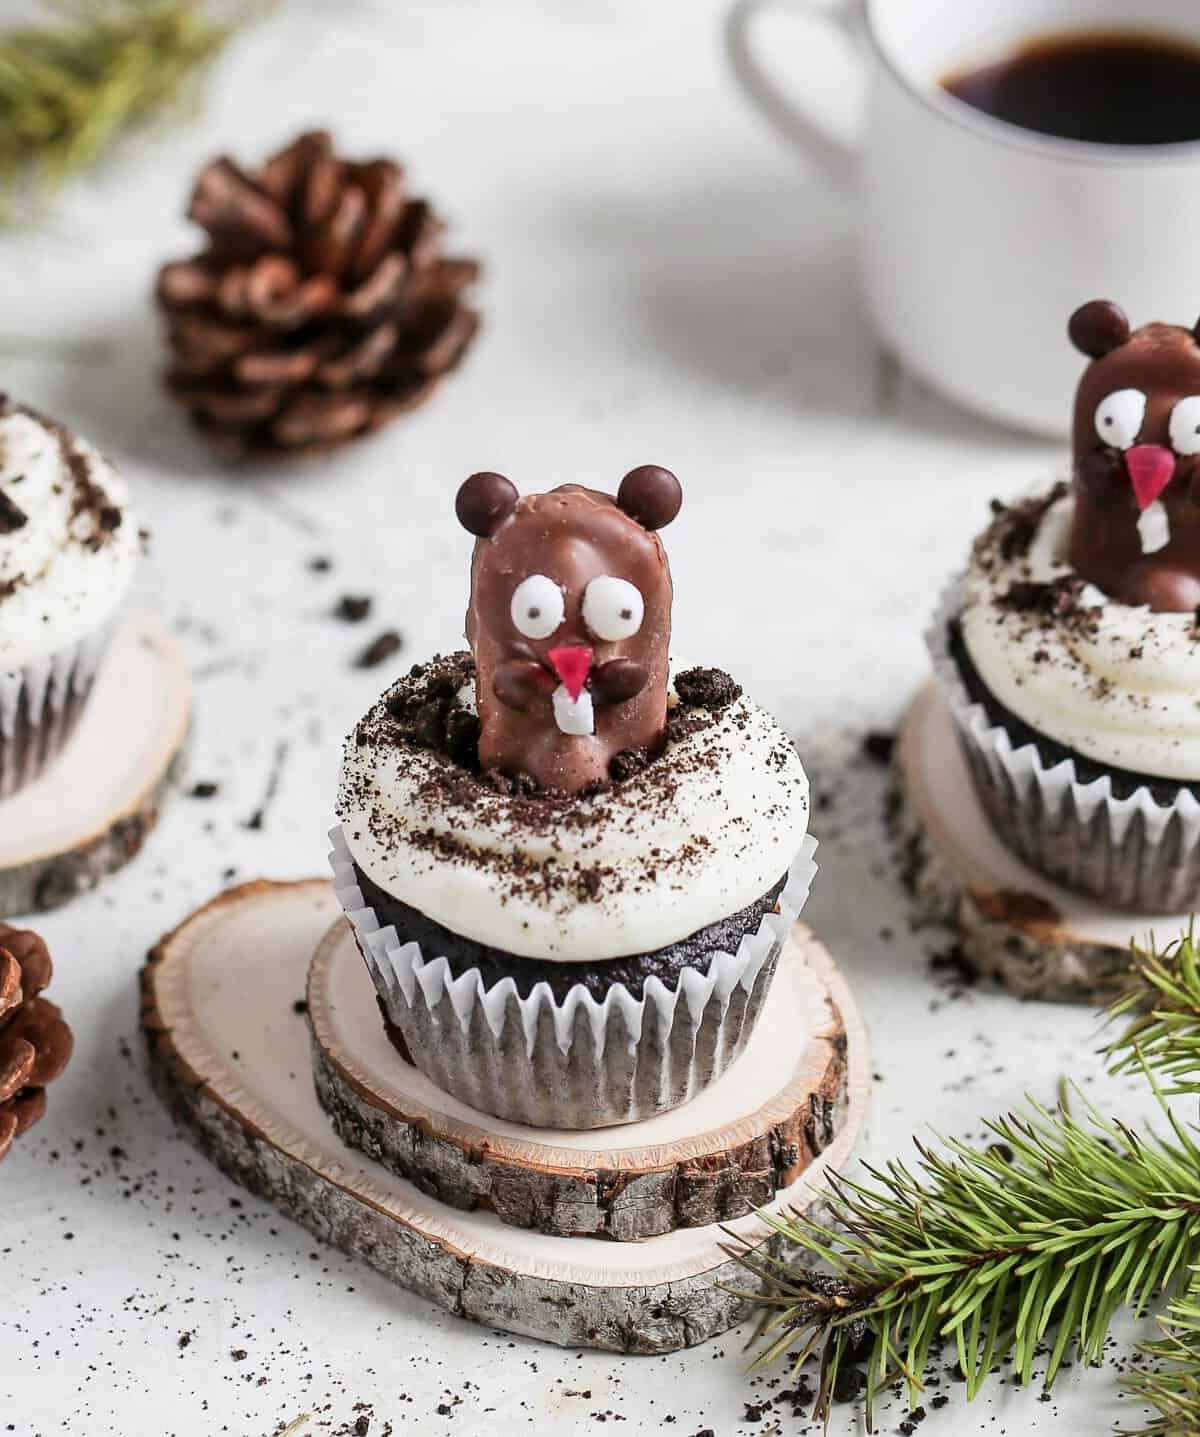  These Groundhog Day cupcakes will have you singing 